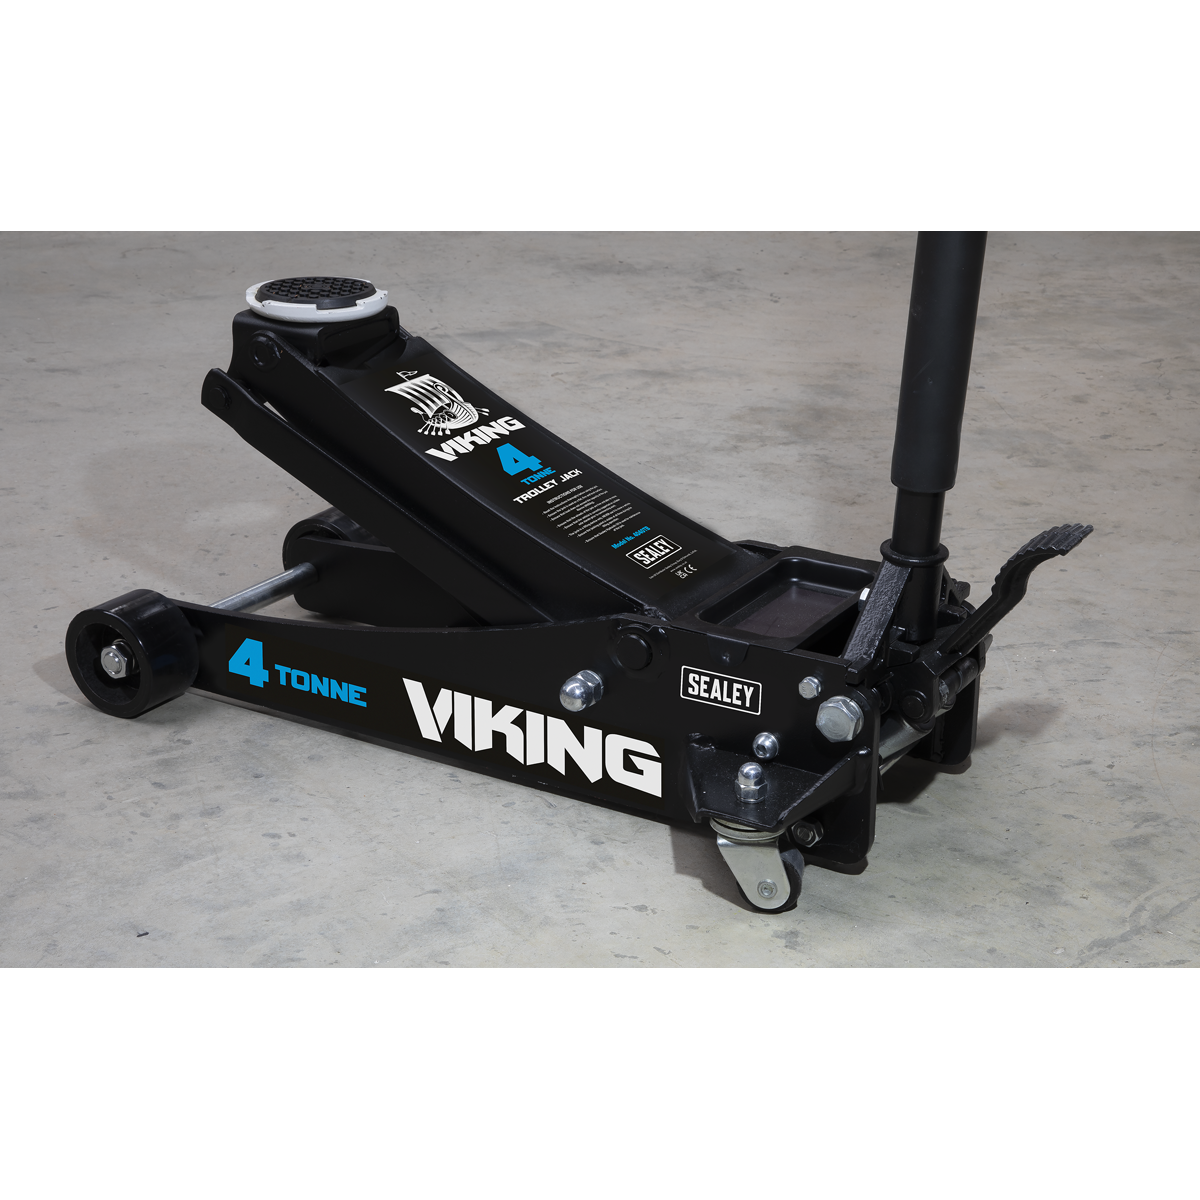 Sealey Viking 4tonne Low Entry Tyre Bay Trolley Jack with Rocket Lift 4040TB